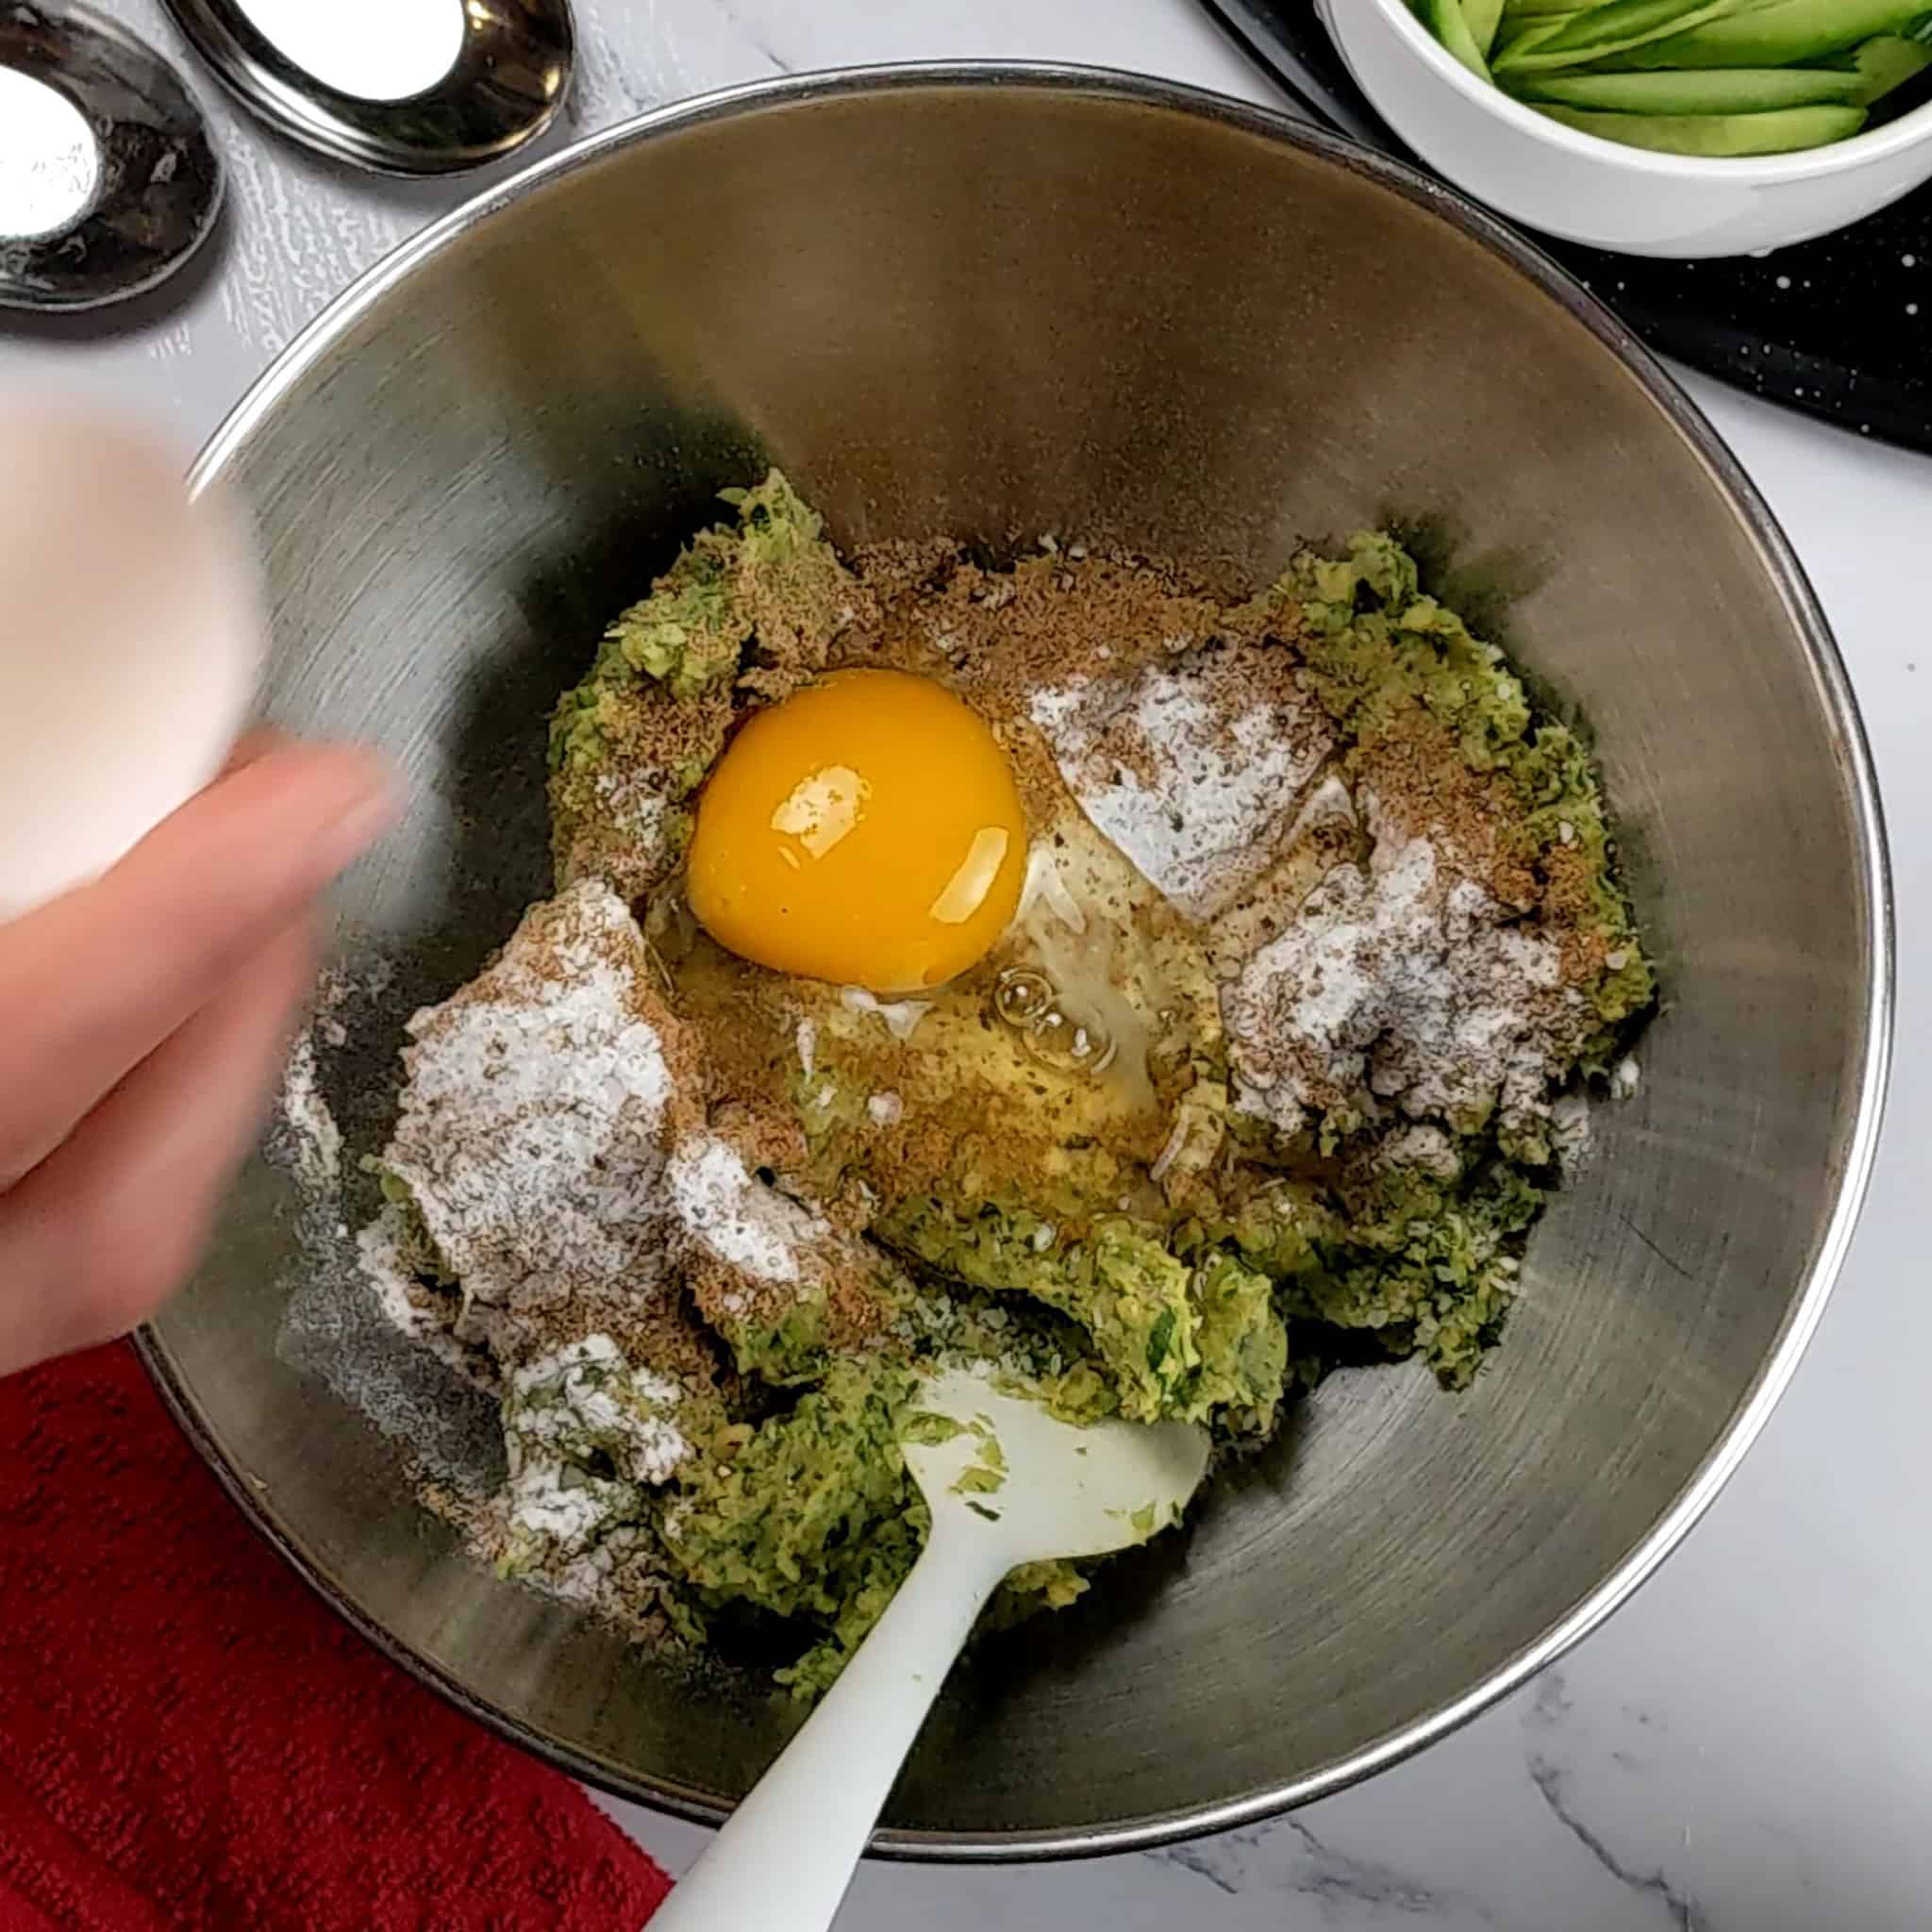 a stainless steel mixing bowl with the blended chickpea herb mixture with a raw egg, and baking soda with a spatula inside.